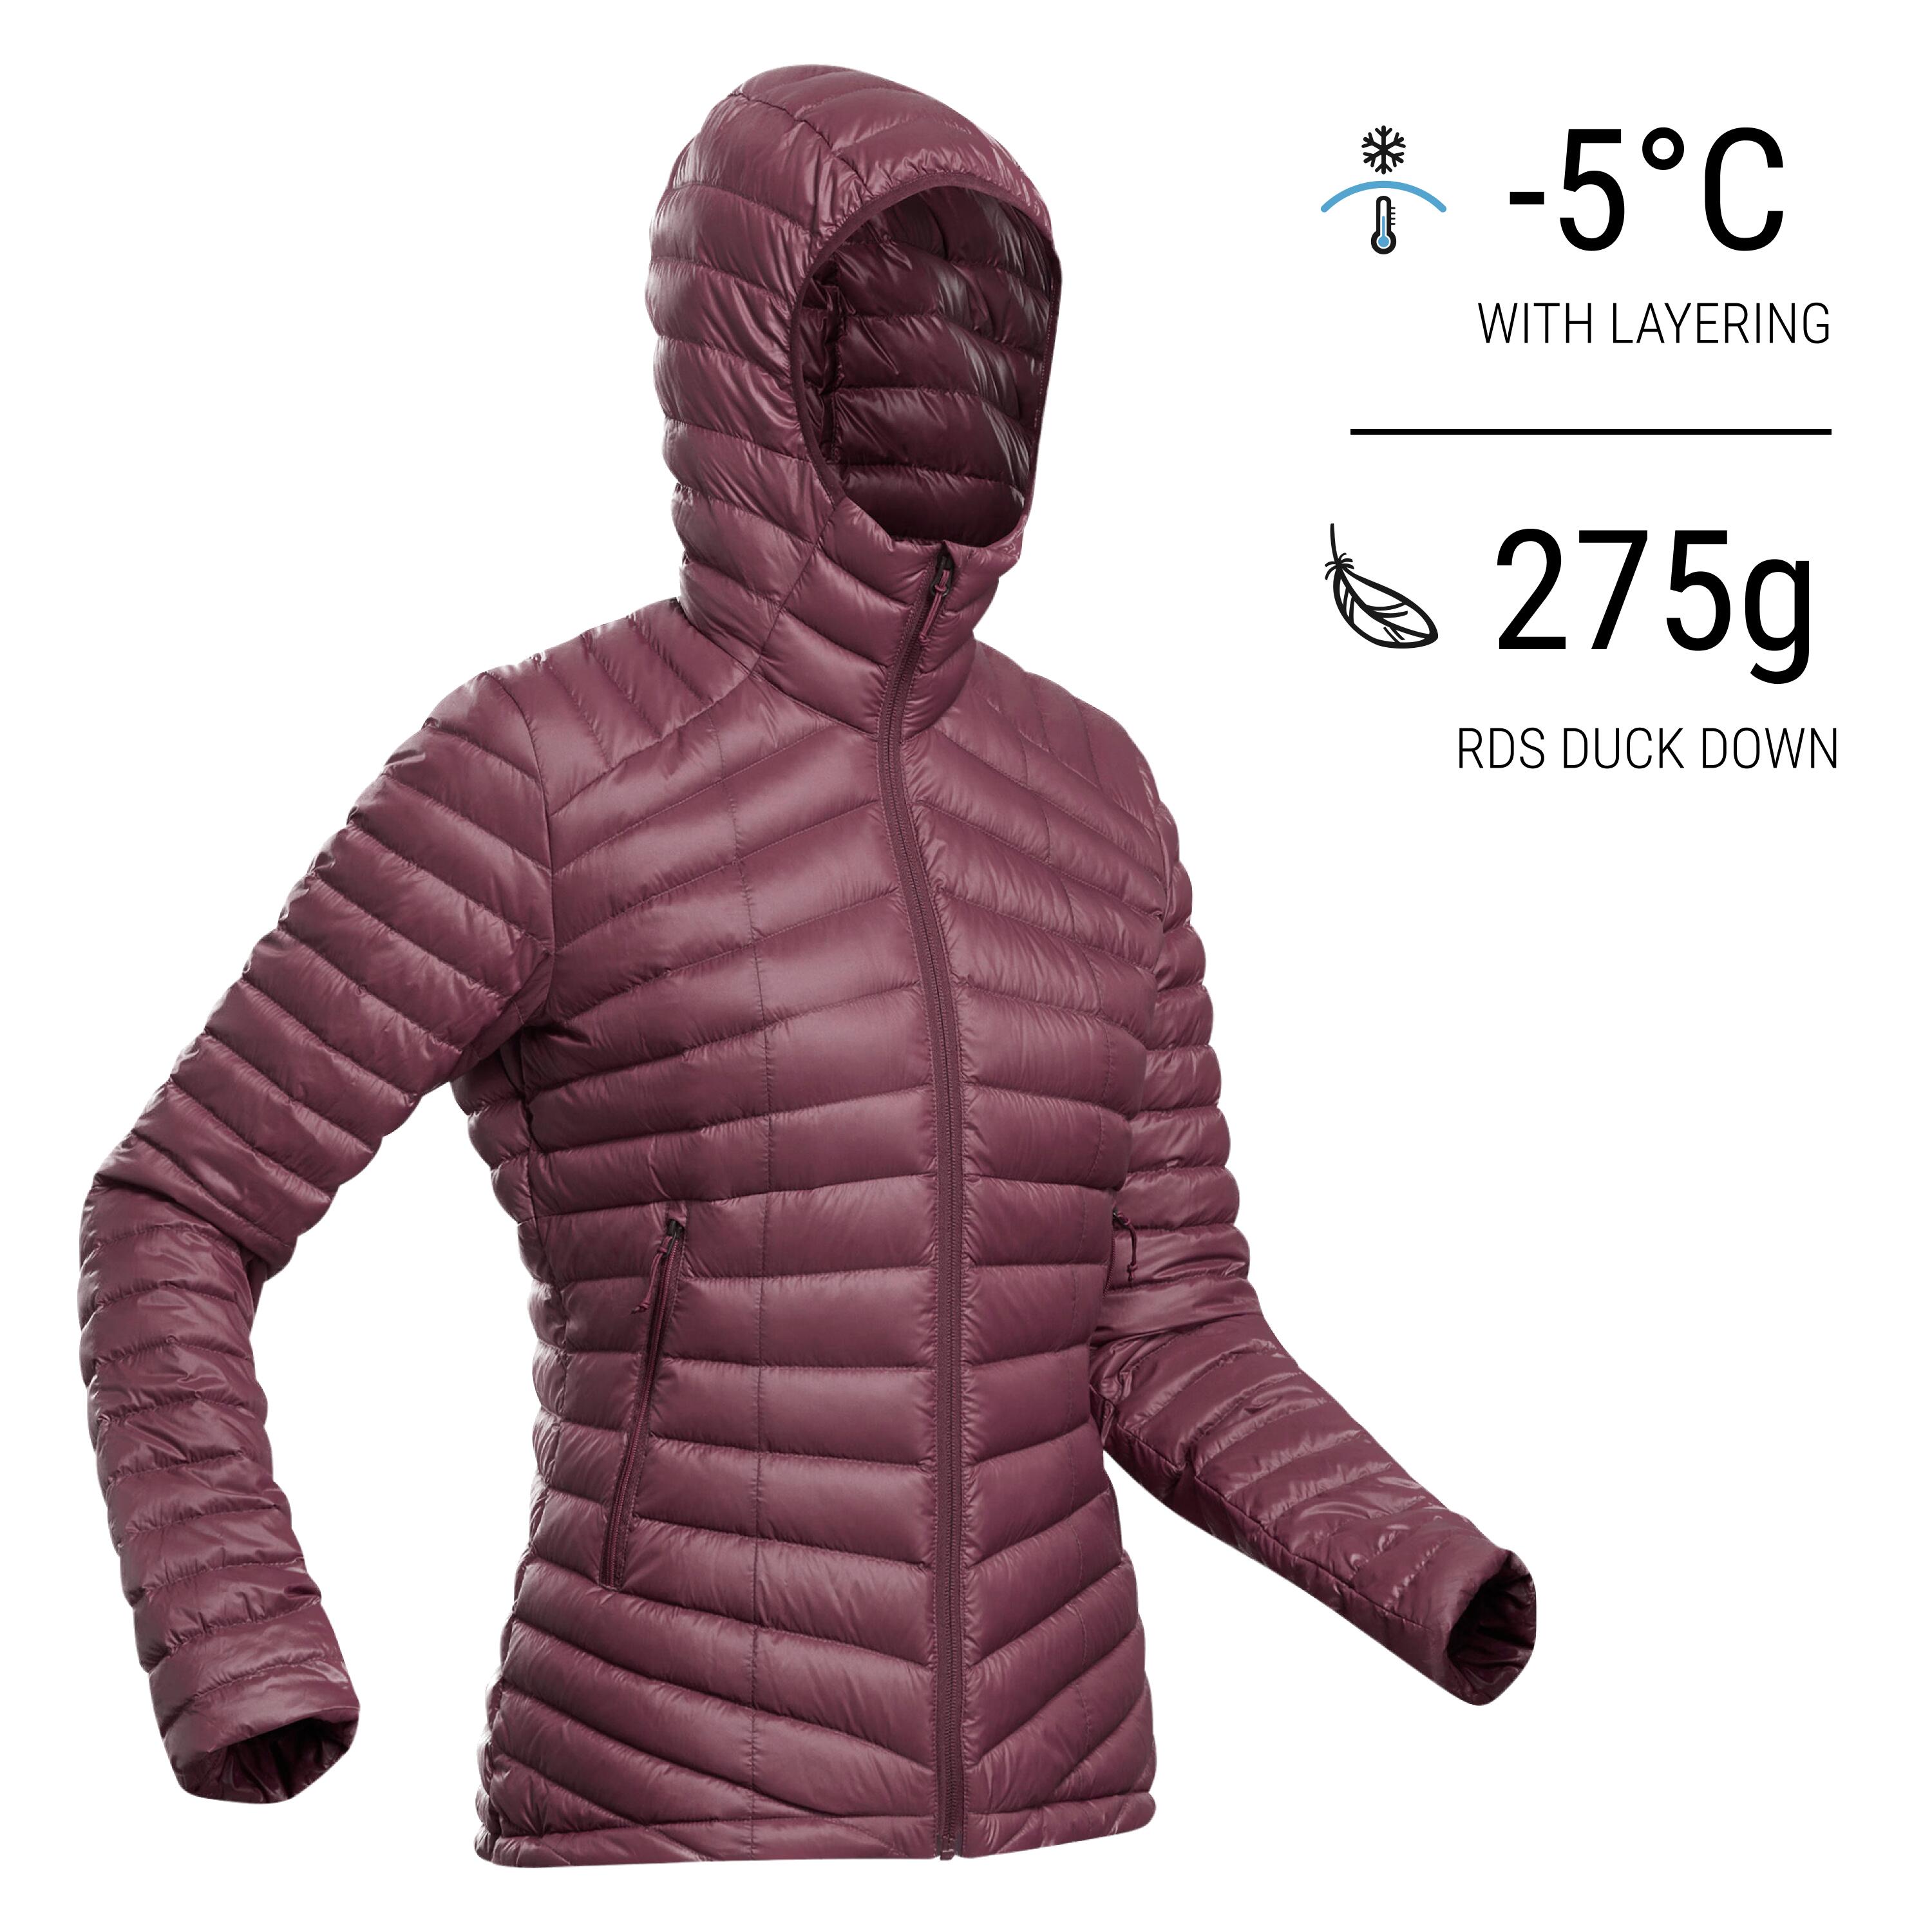 Orolay Women's Lightweight Quilted Packable Down Jacket